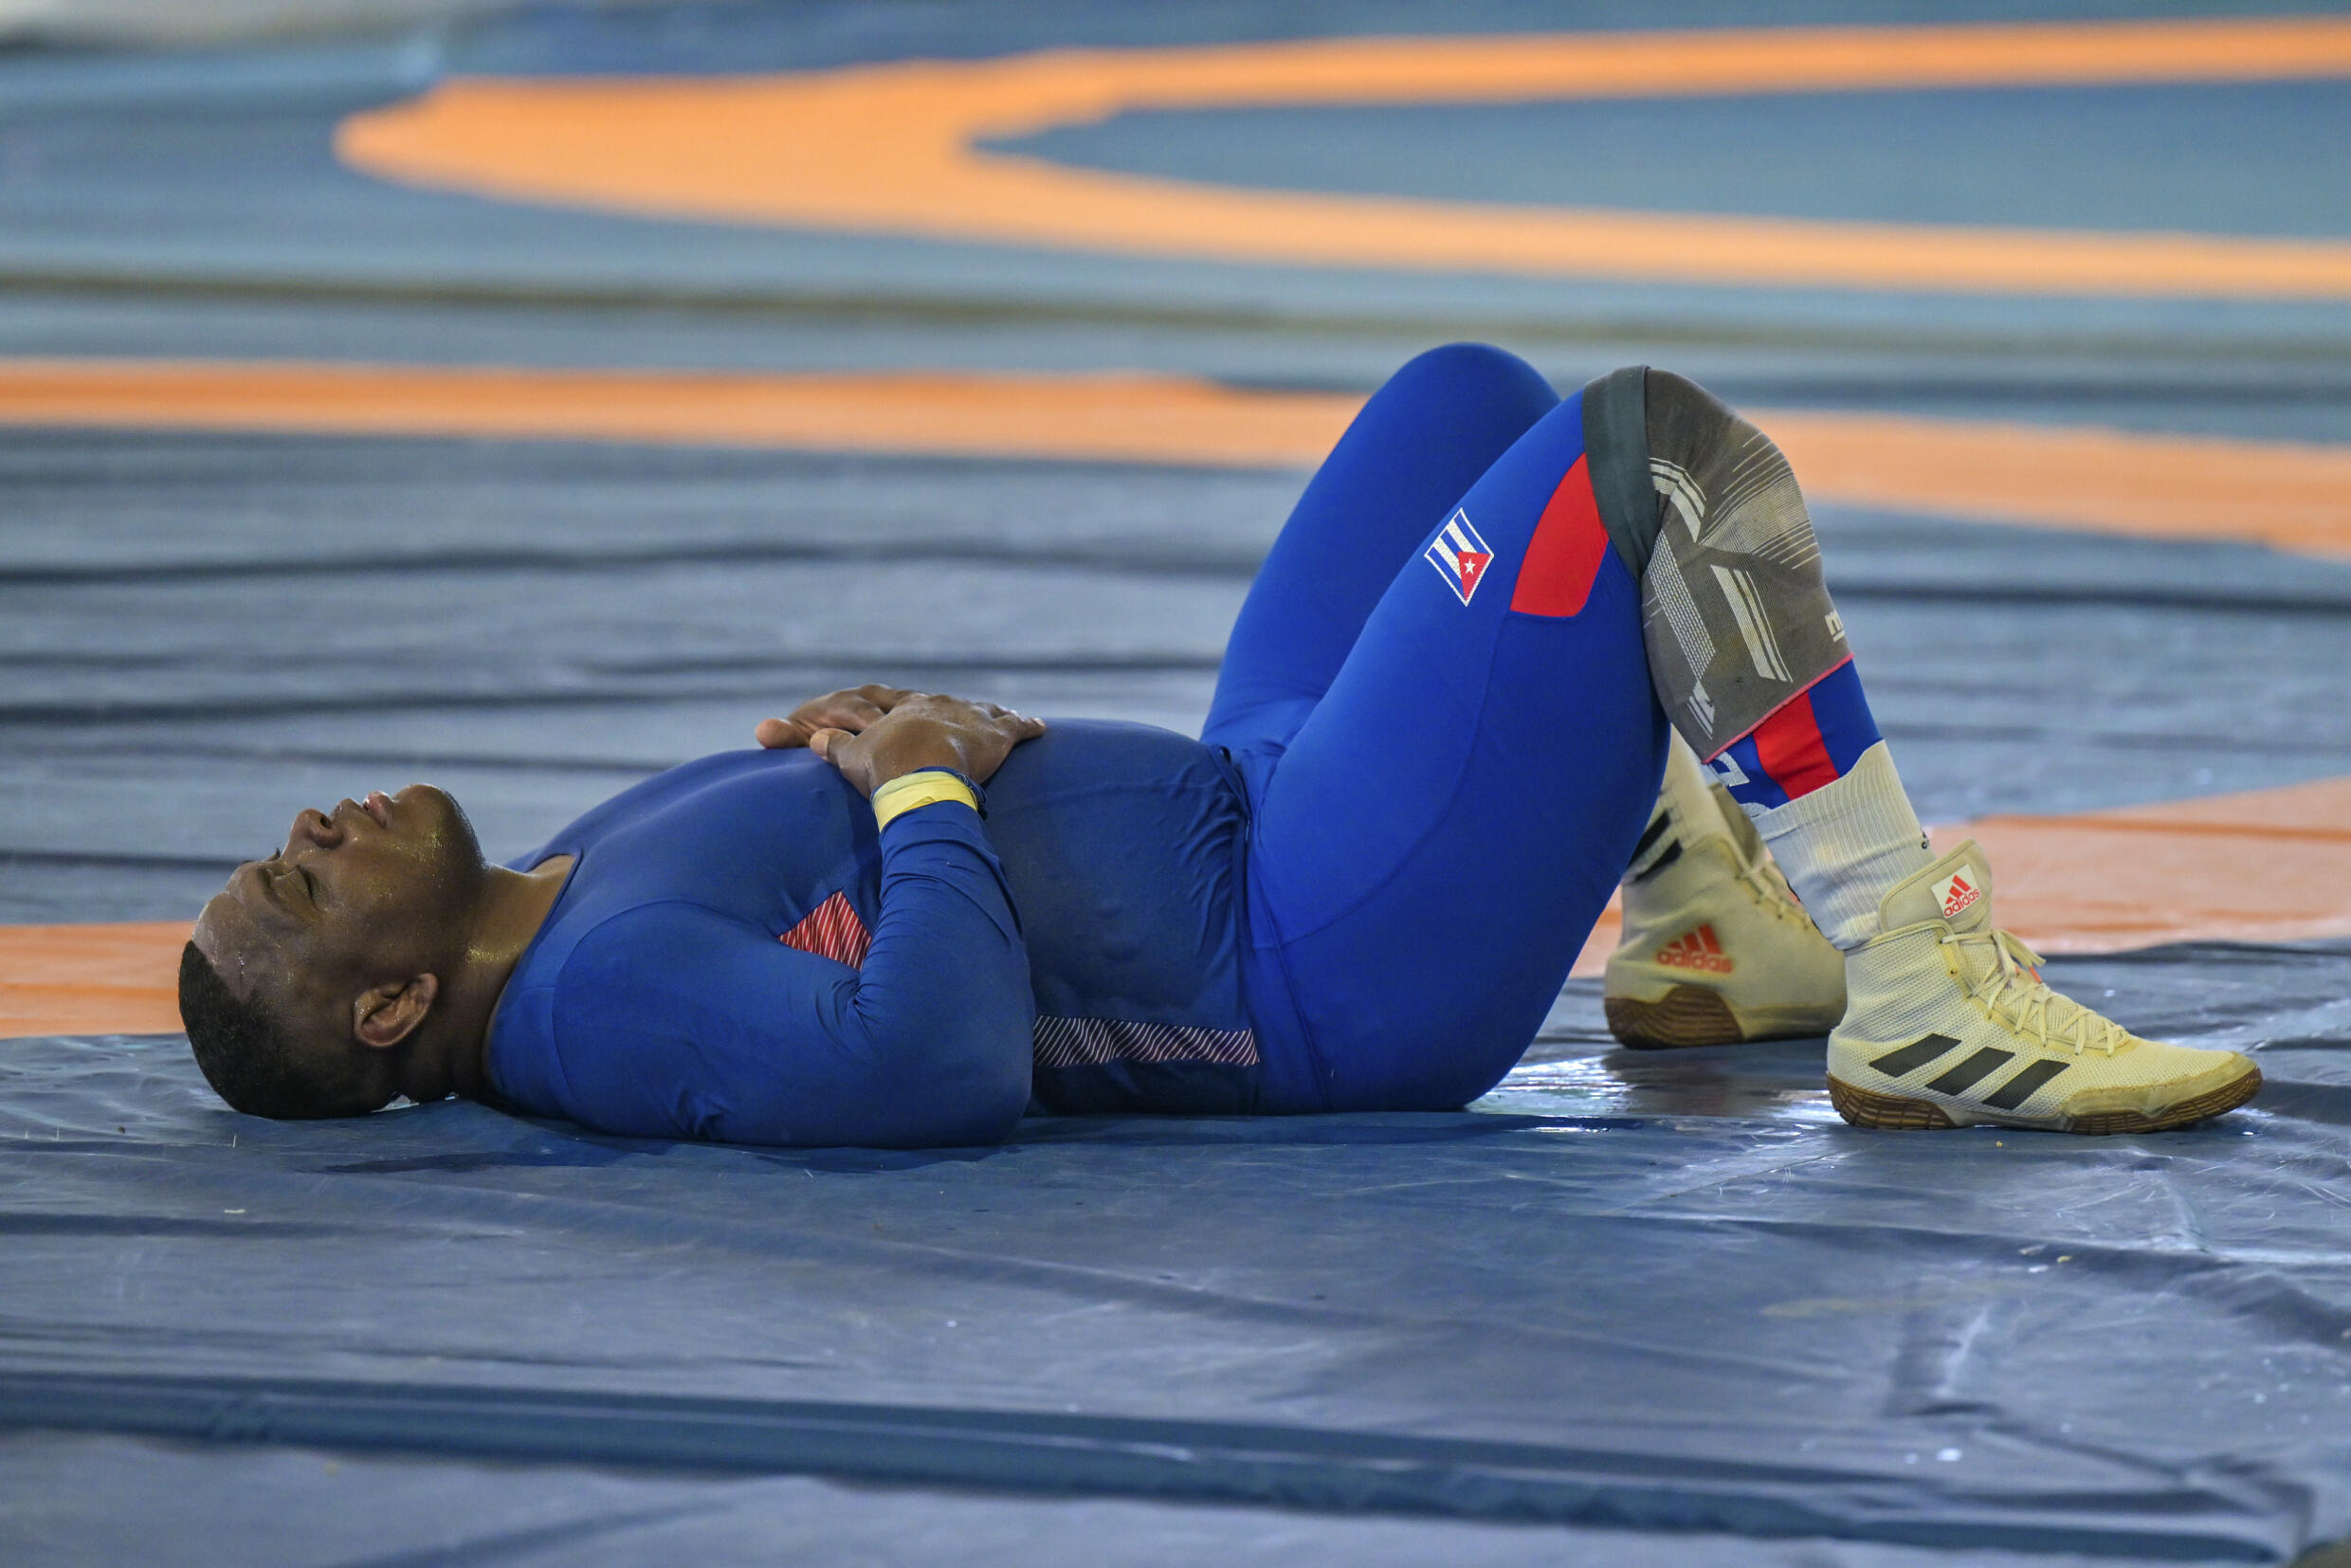 Mijain Lopez recovers after an intensive training session in Havana, as part of his preparation for Paris-2024, where he will aim for a fifth gold medal.